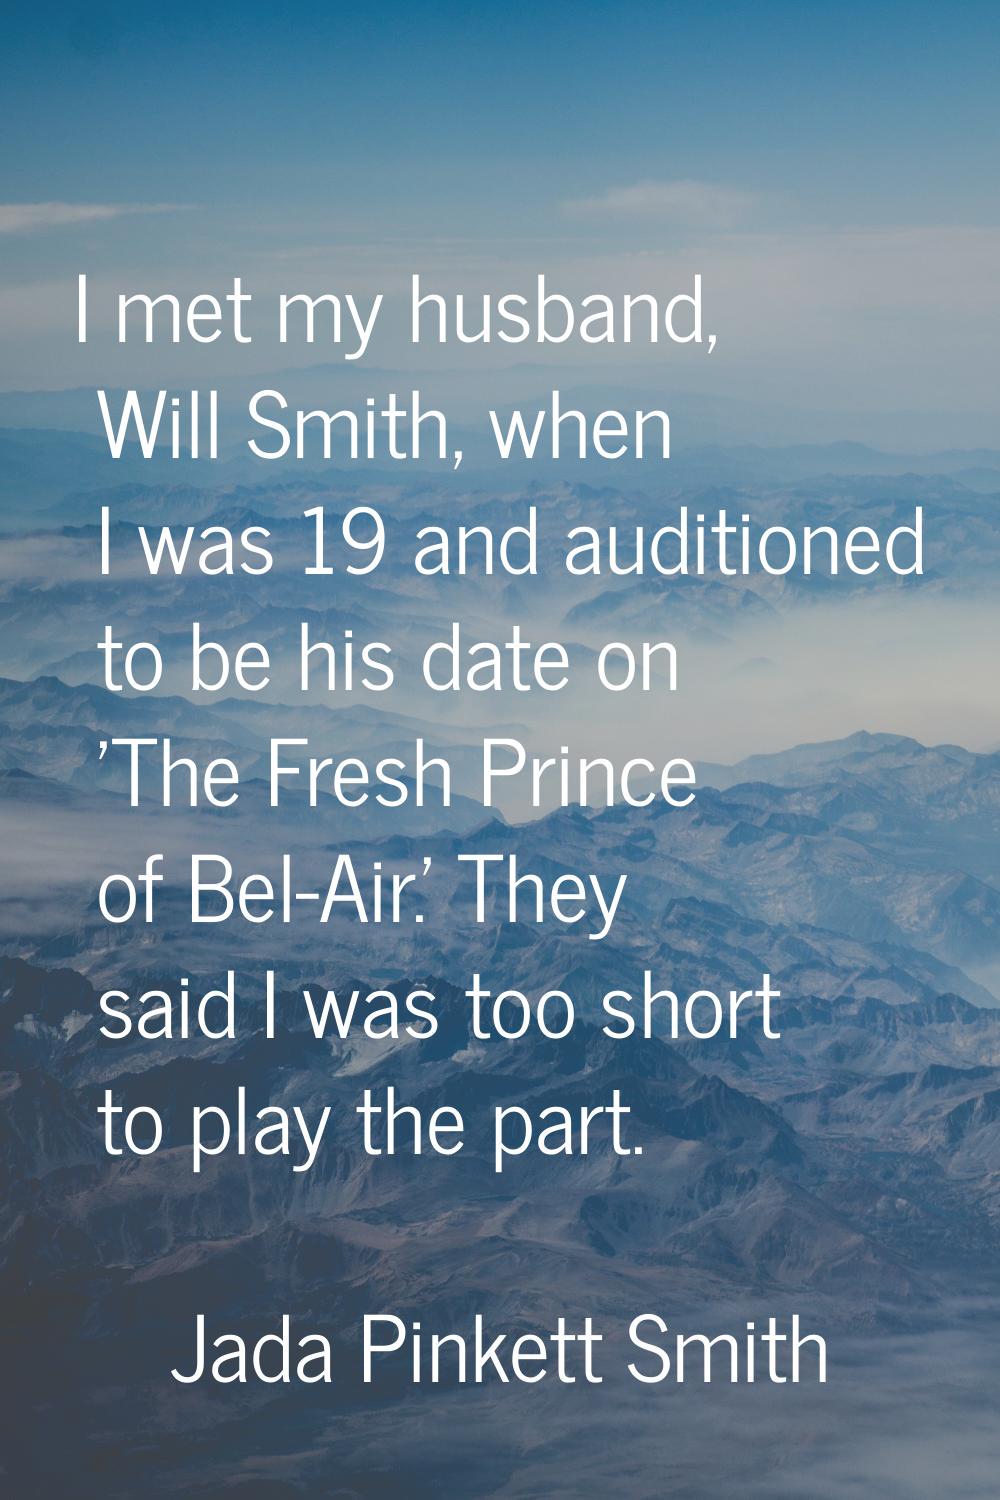 I met my husband, Will Smith, when I was 19 and auditioned to be his date on 'The Fresh Prince of B